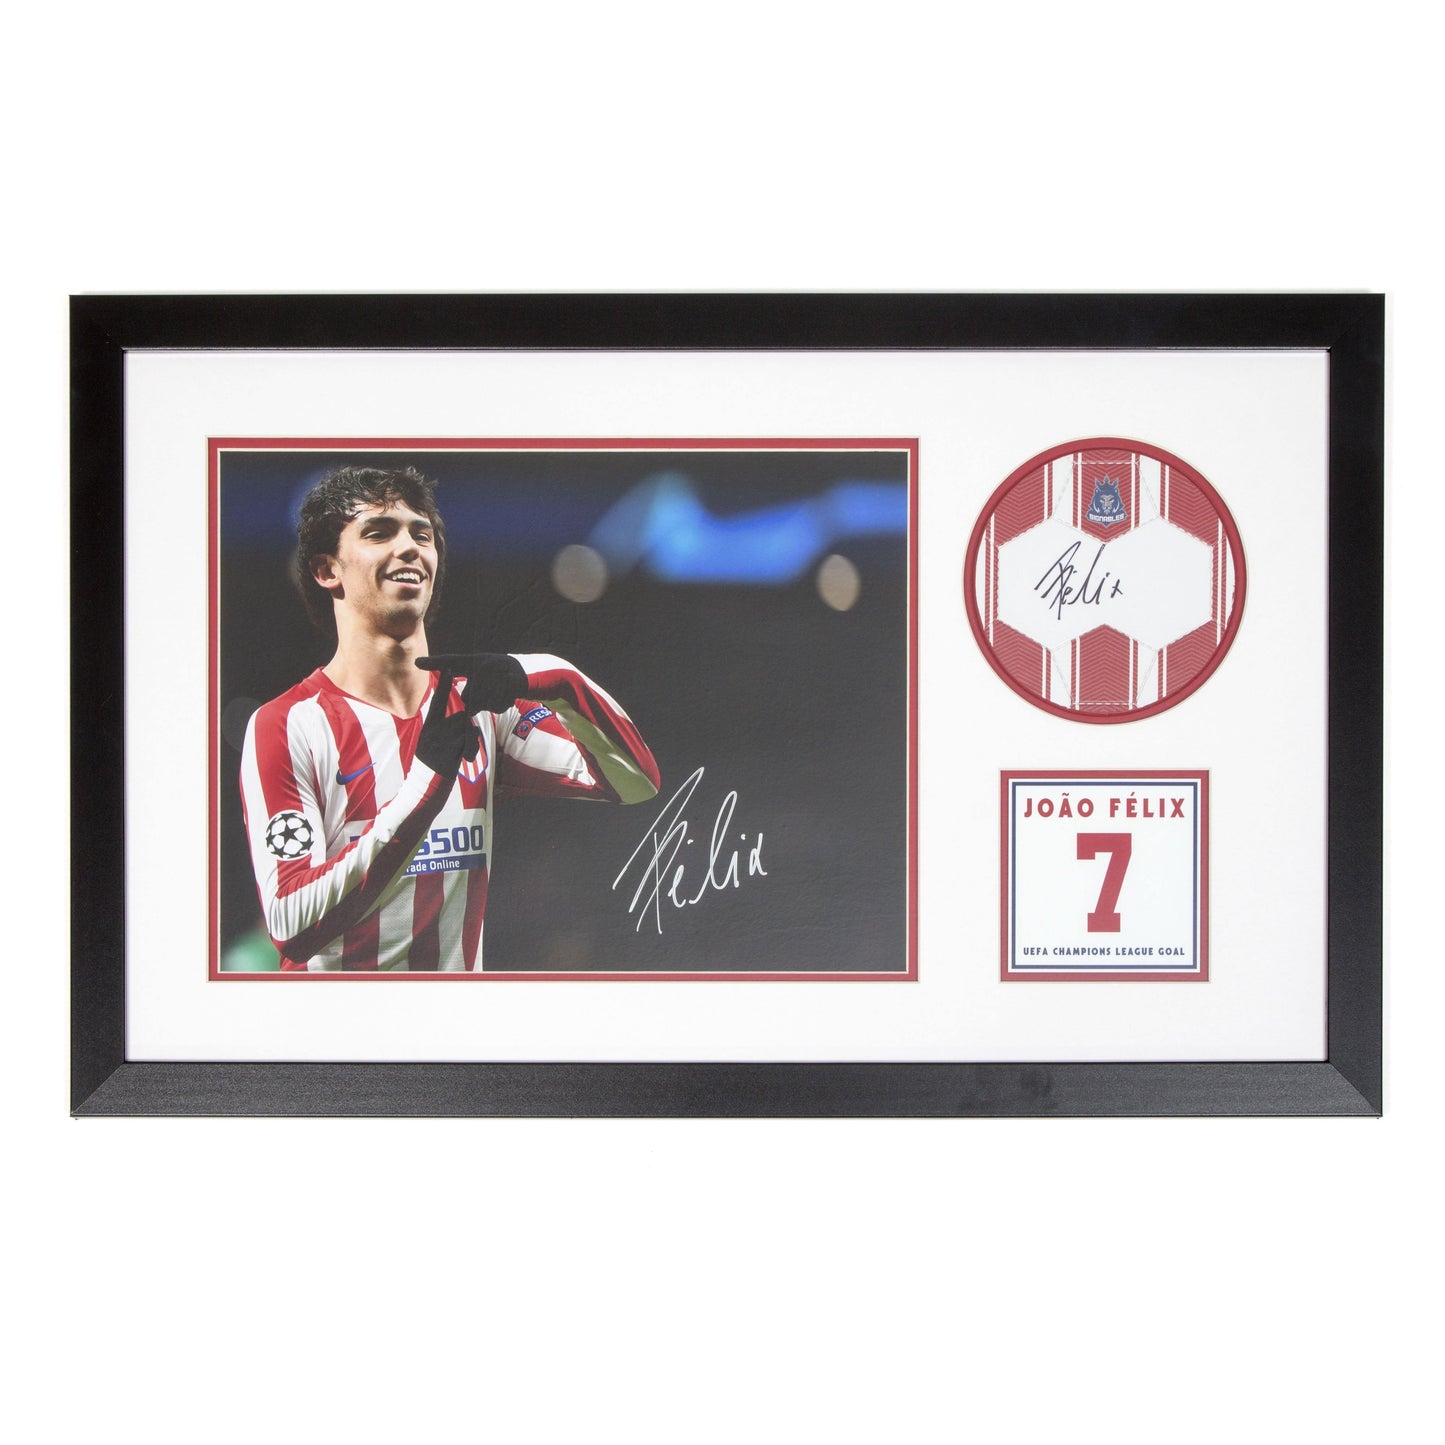 Joao Felix Signed Photo and Signble in Wood Frame